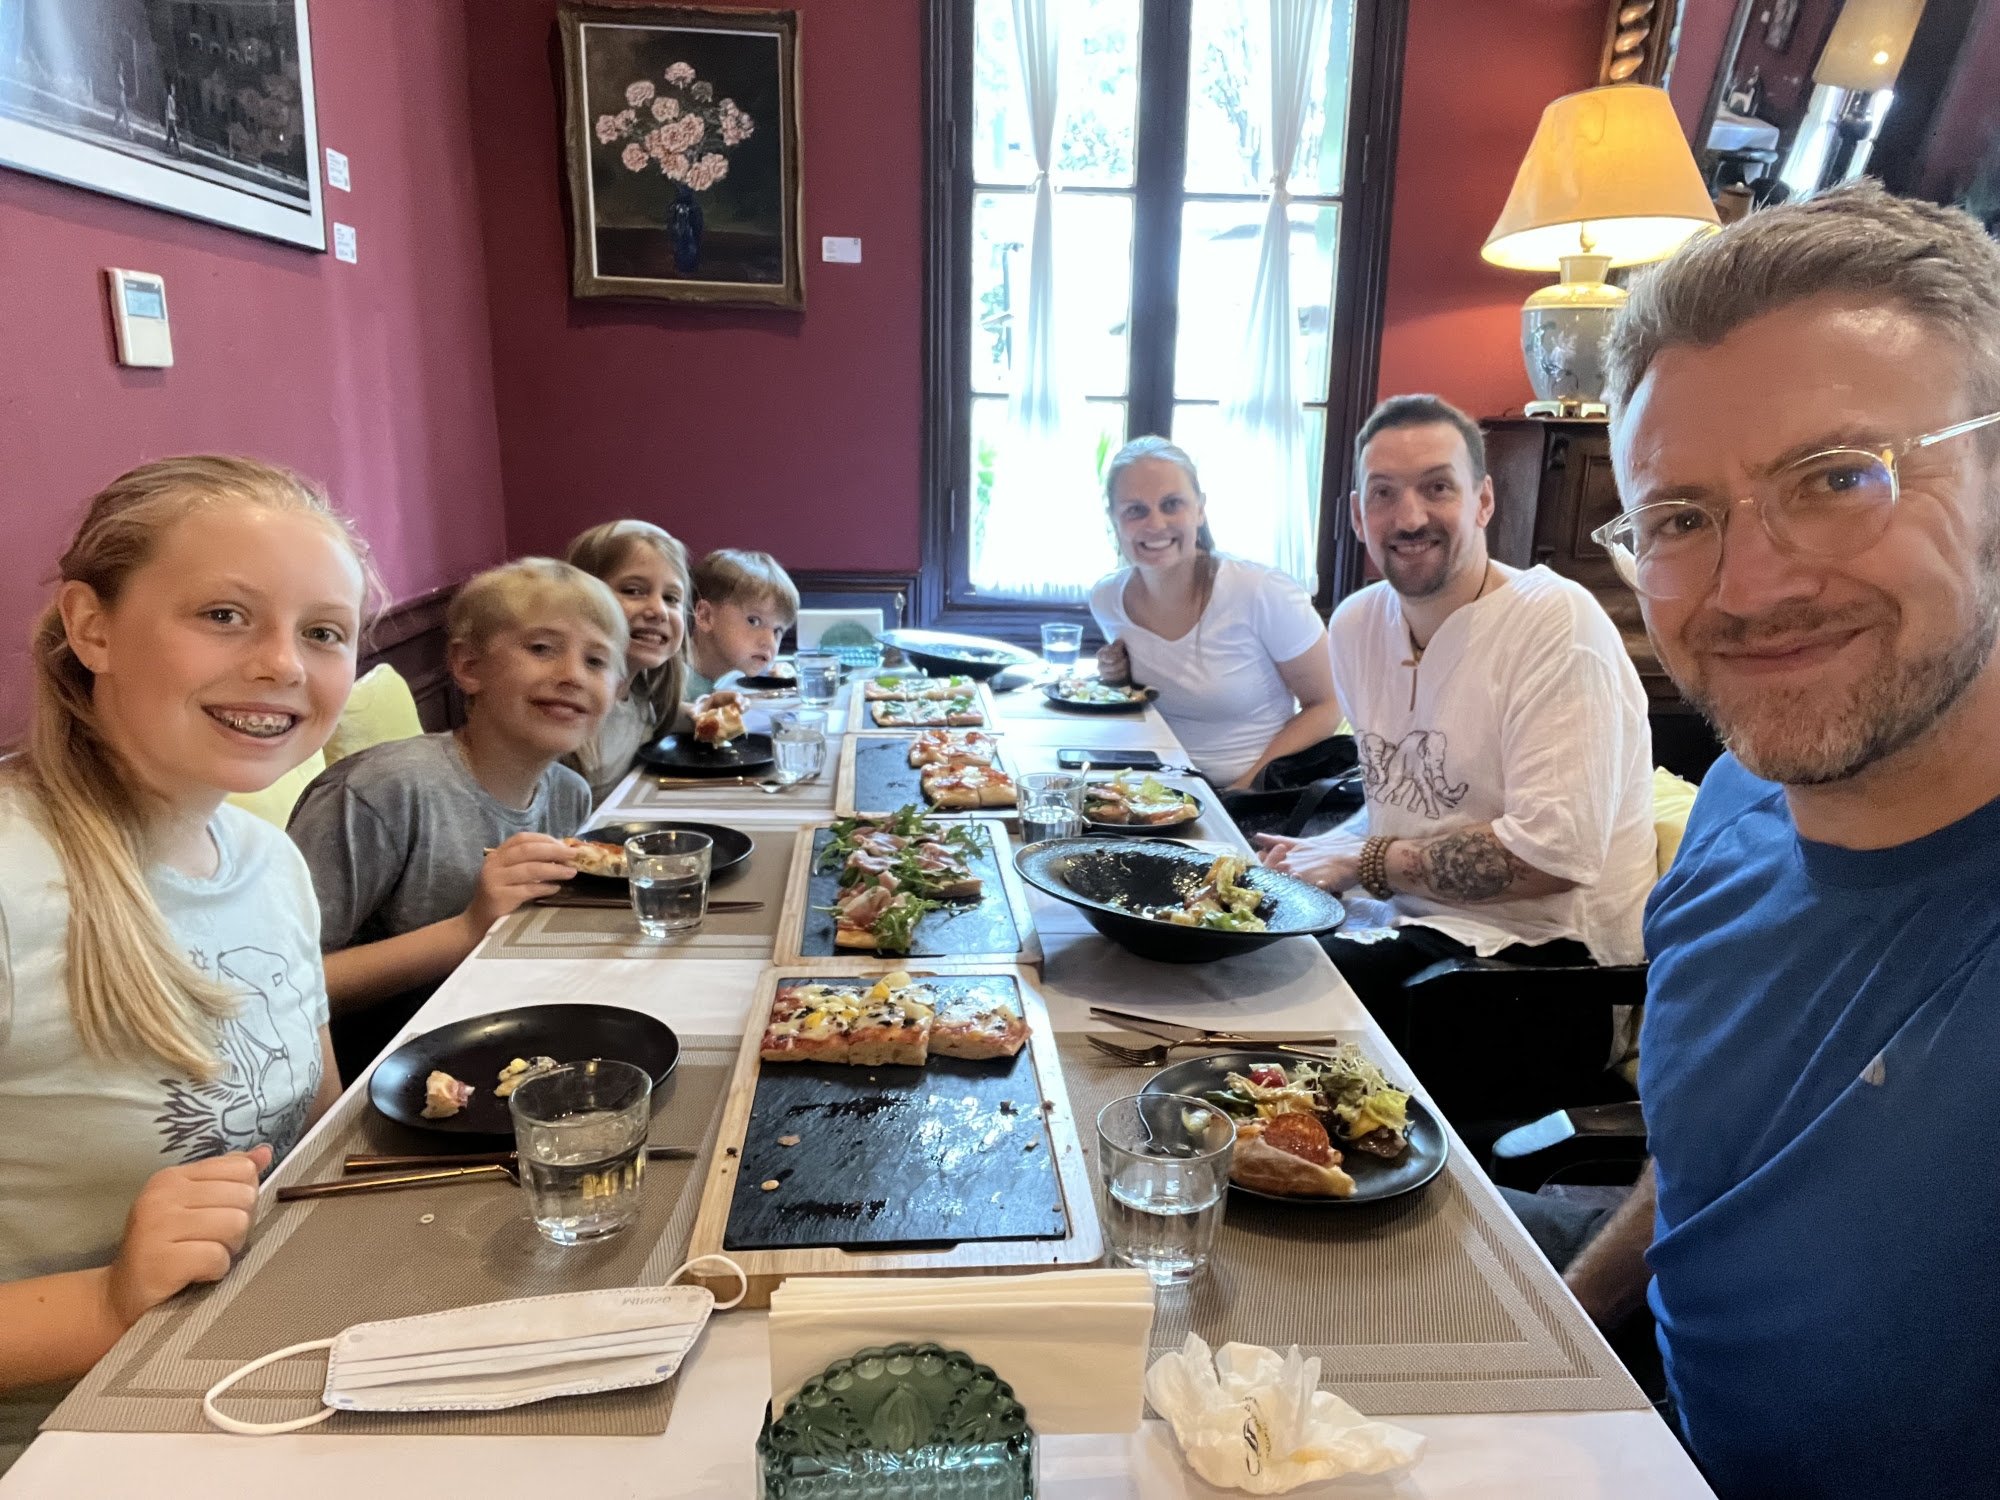 American author Garrett Jones and his family came to visit Chongqing on their summer trip.